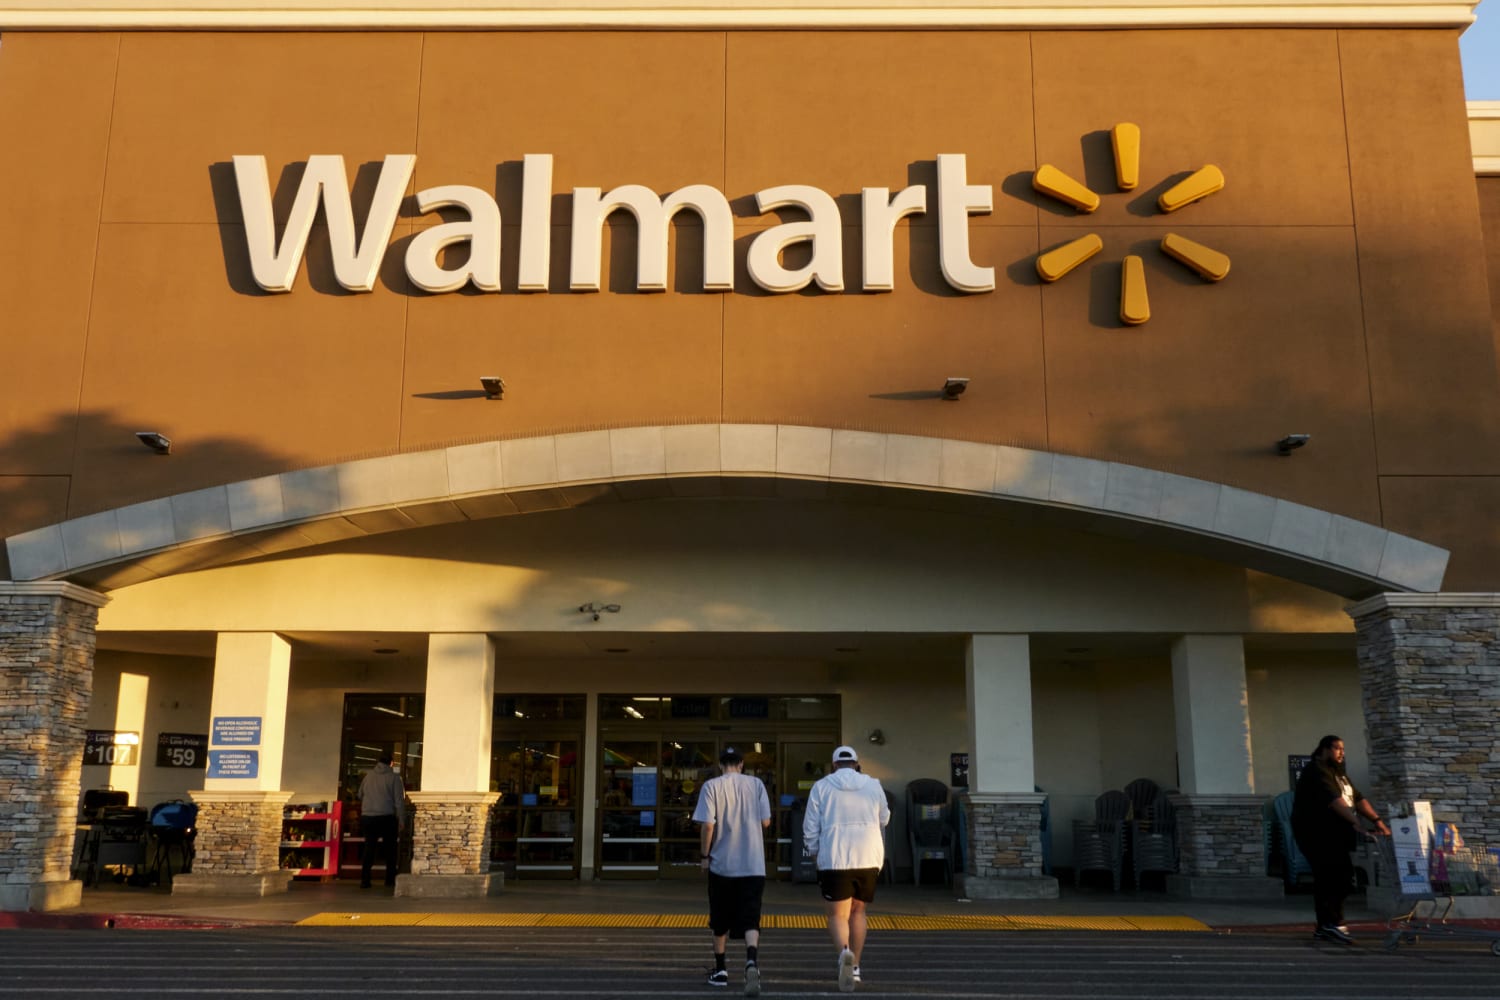 Walmart store hours: The retailer is cutting hours because of COVID-19